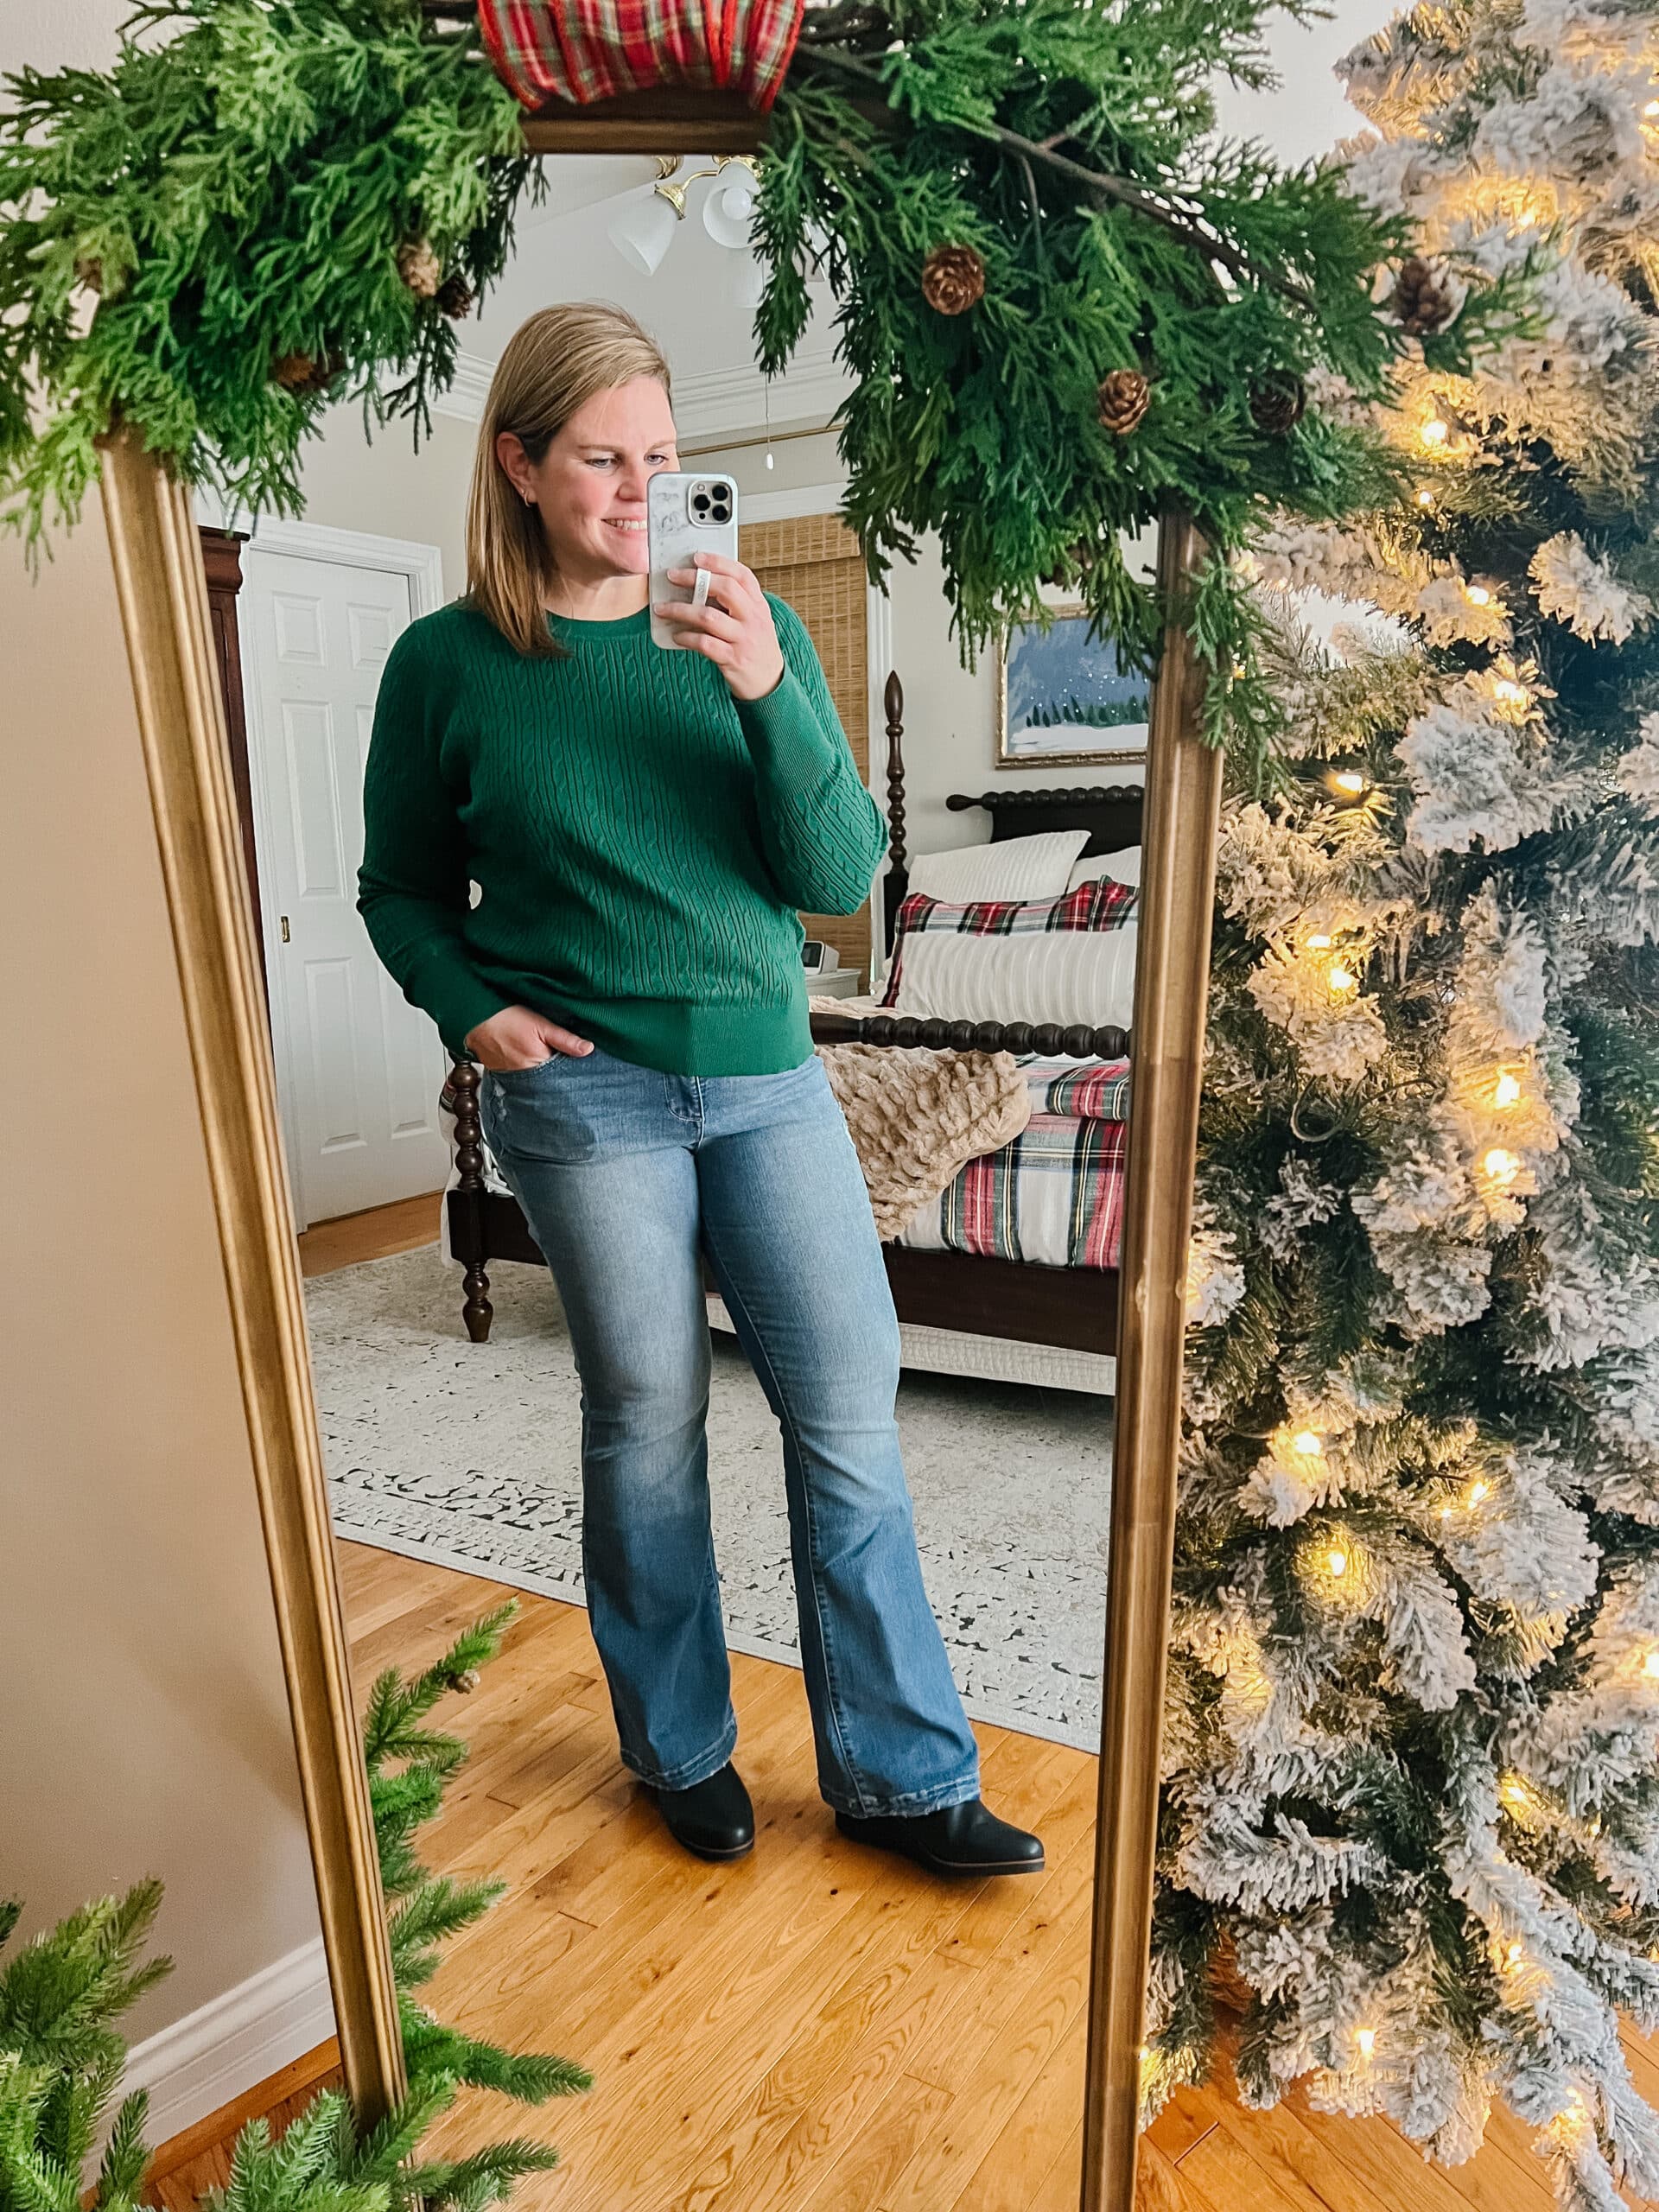 green sweater, jeans, boots outfit in a Christmas bedroom